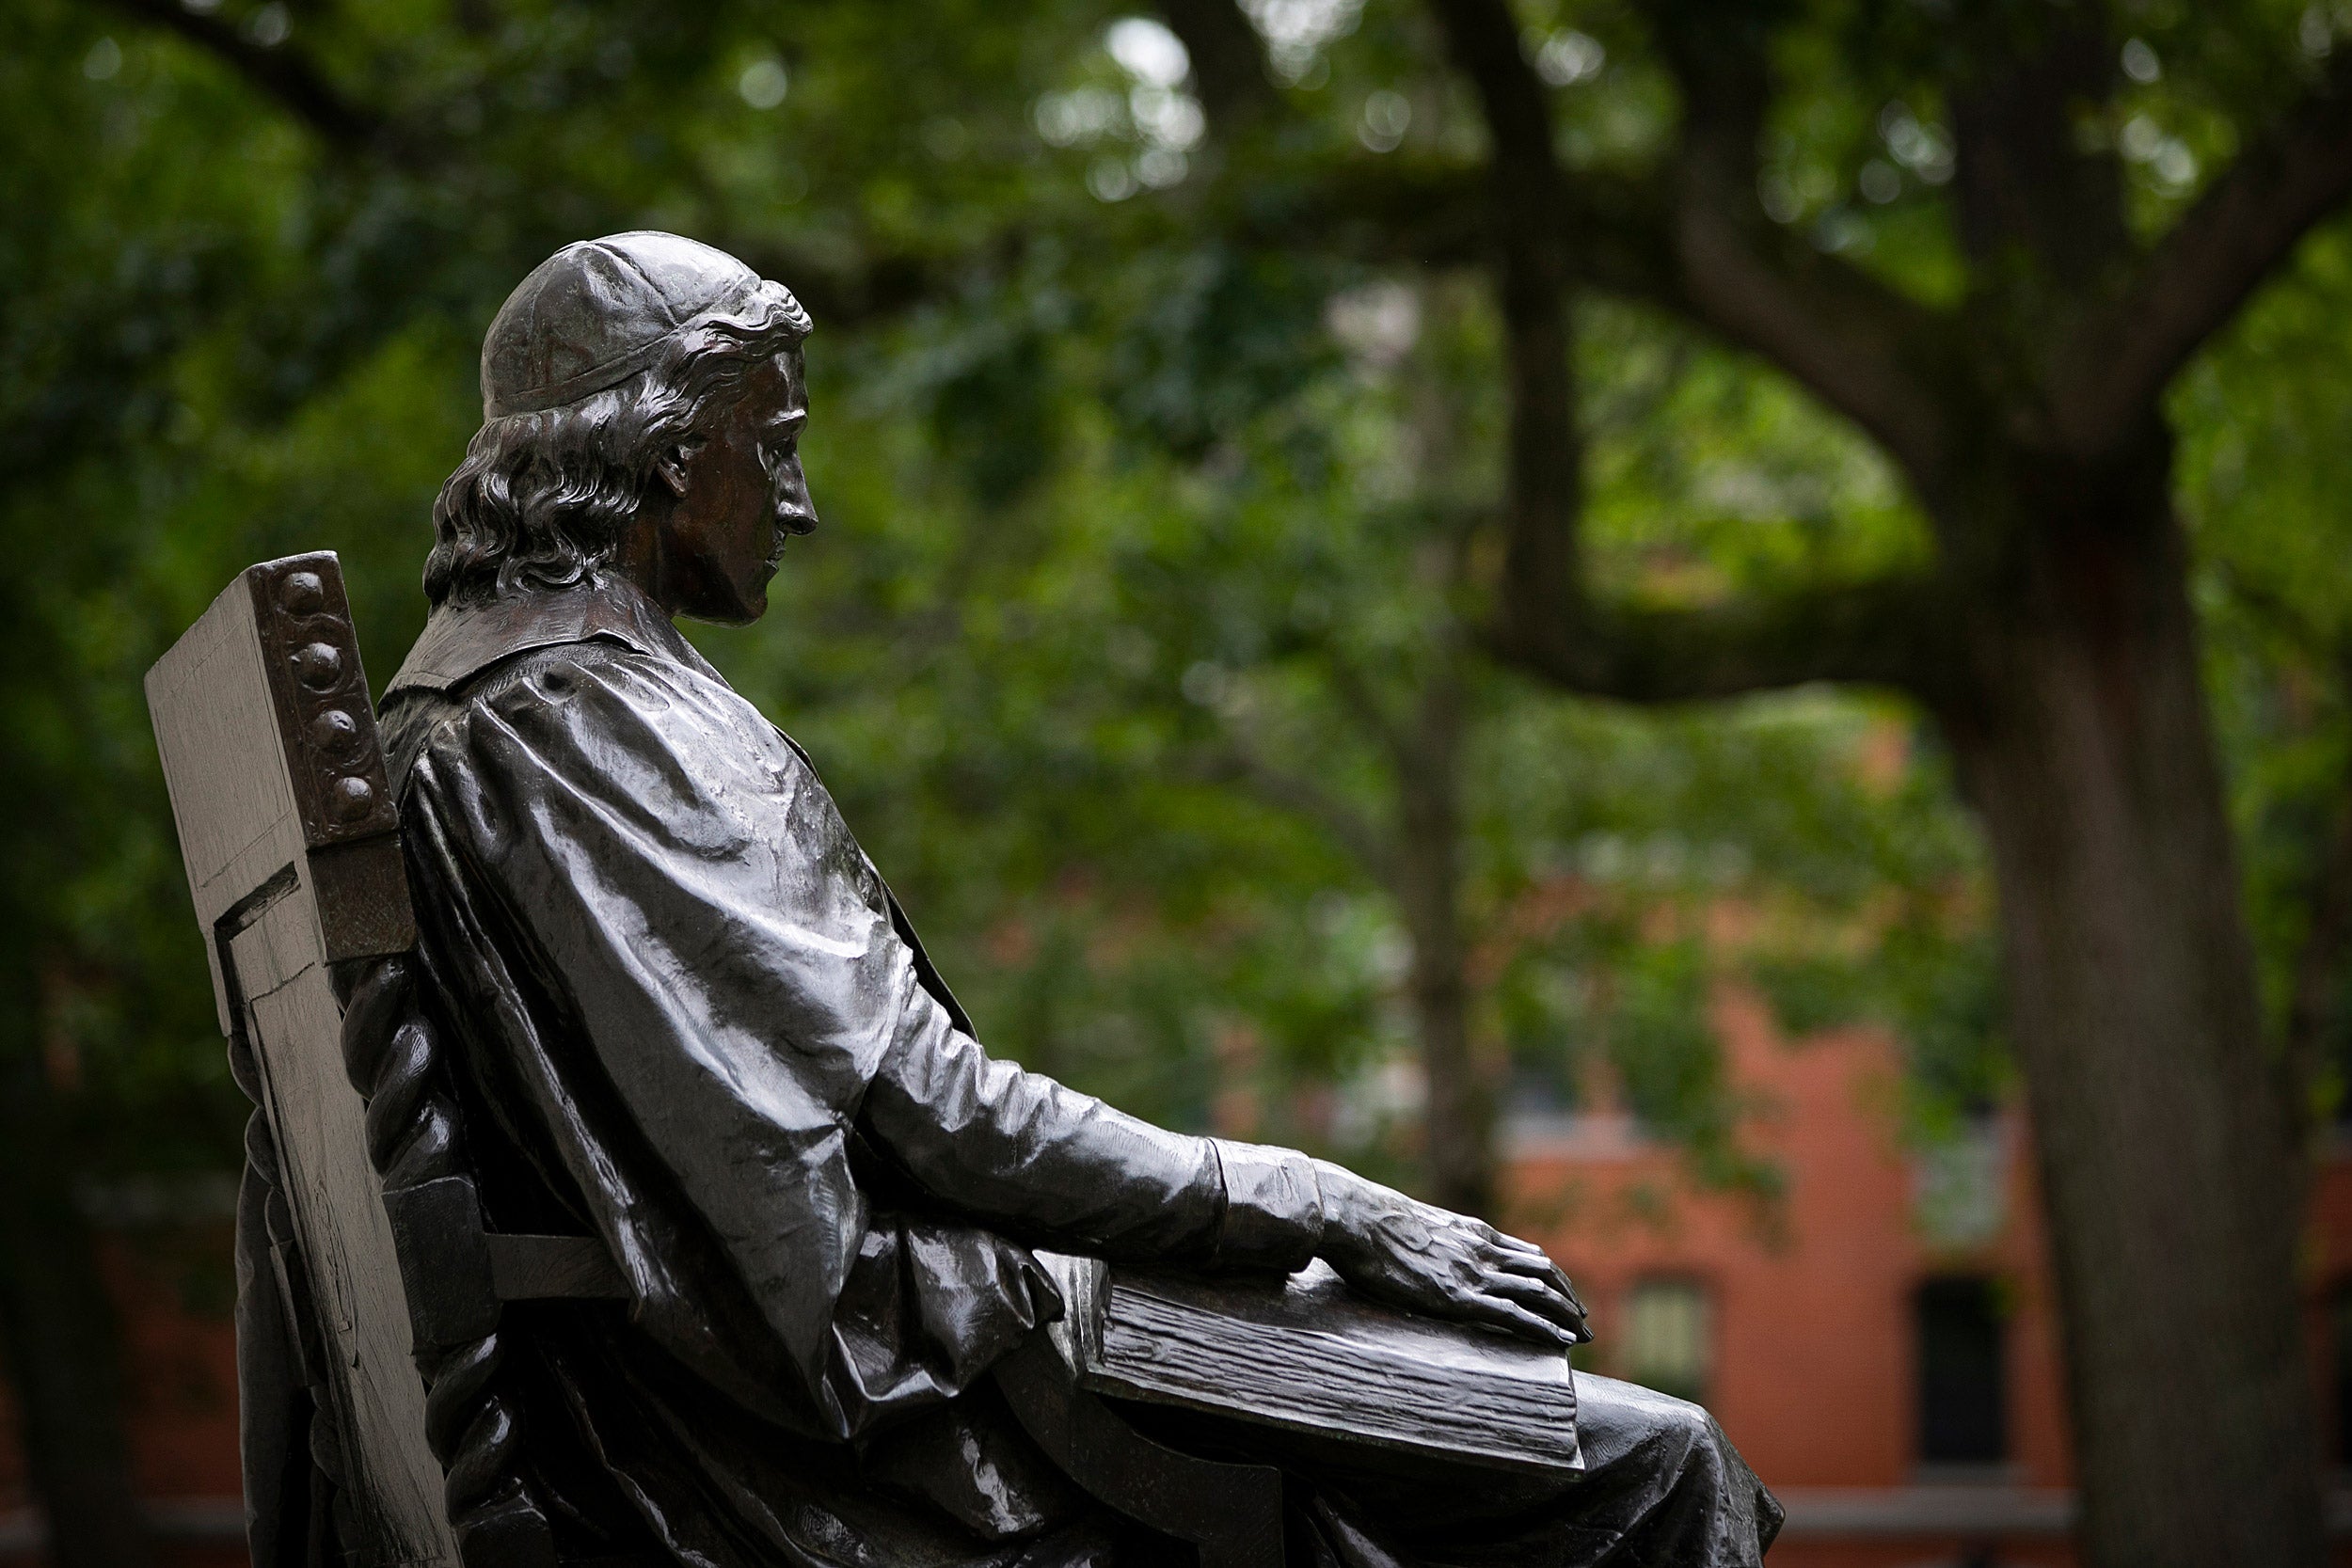 The Harvard Gazette																							The Harvard Gazette																							Big statue on campusBig statue on campusBacow urges listeners to welcome civil discourseBacow urges listeners to welcome civil discourse